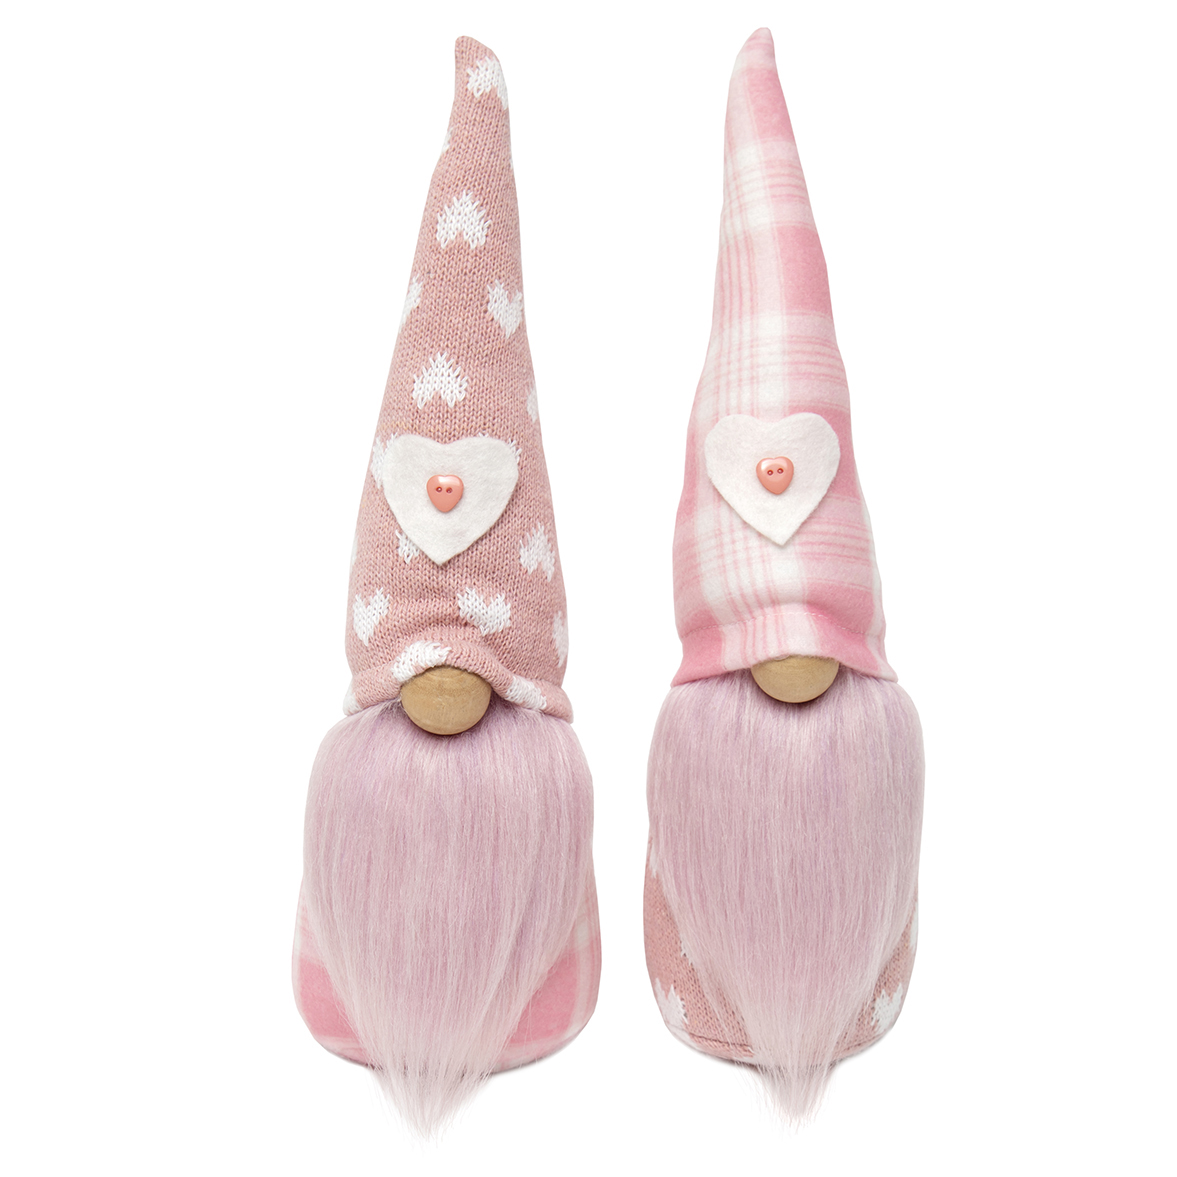 Think Pink Gnome with Wood Nose Set of 2